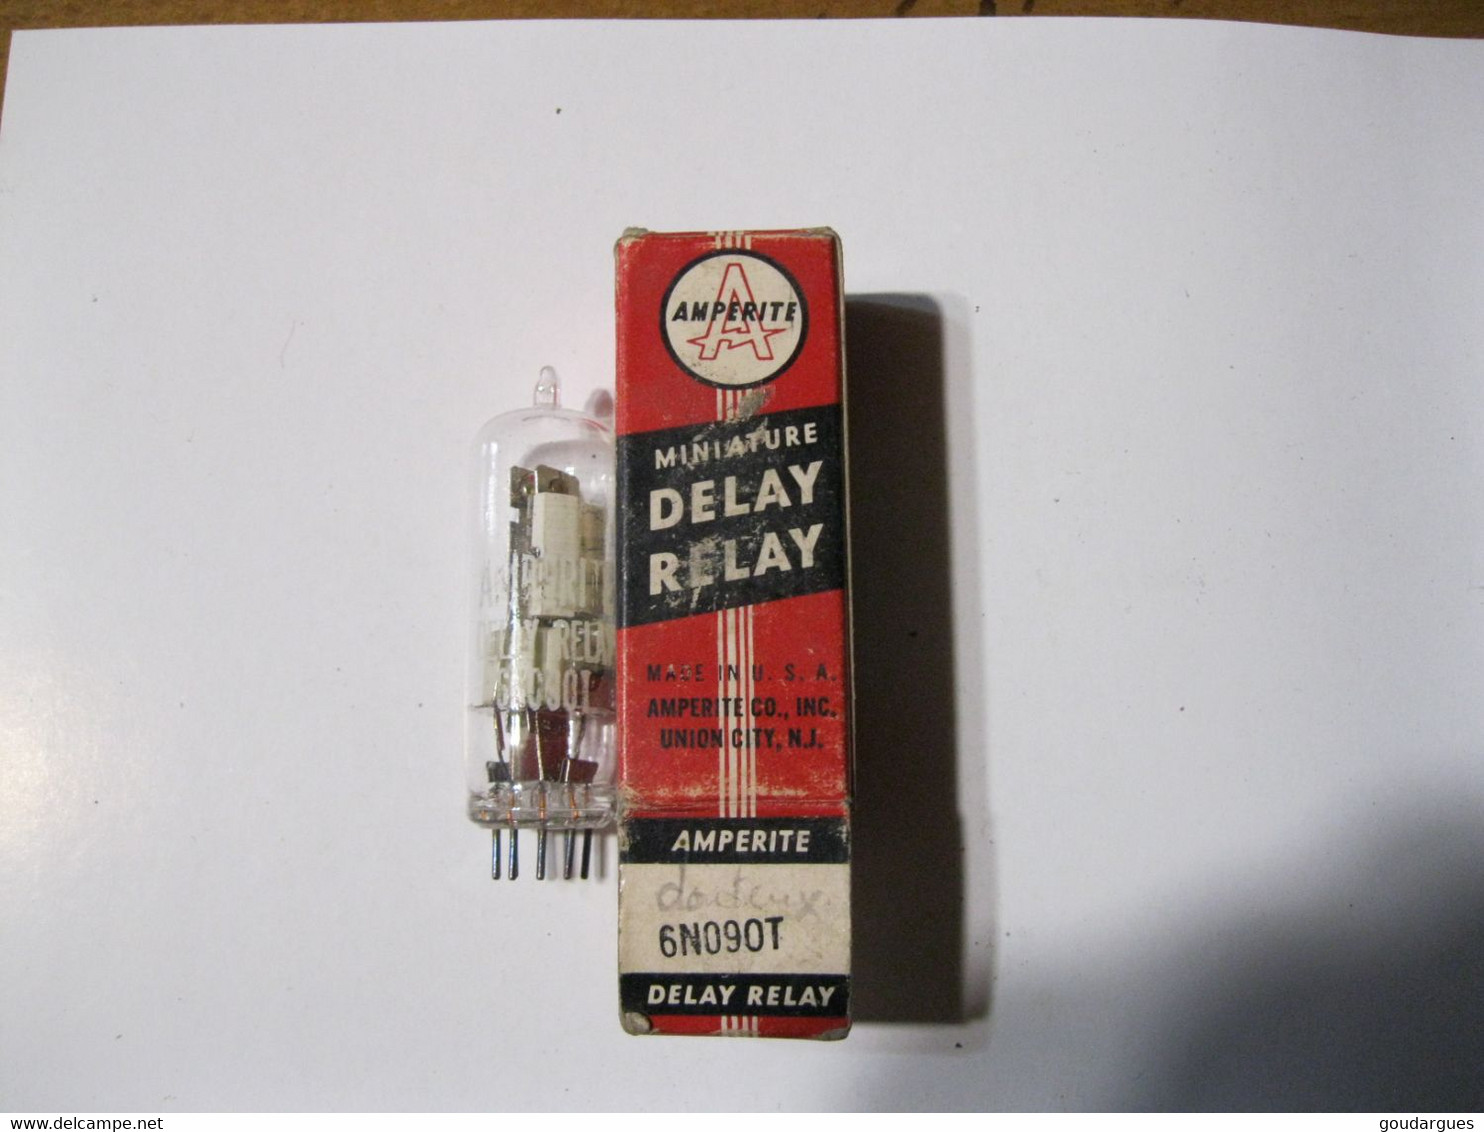 Amperite Miniature Dely Relay 6N090T - Tubes